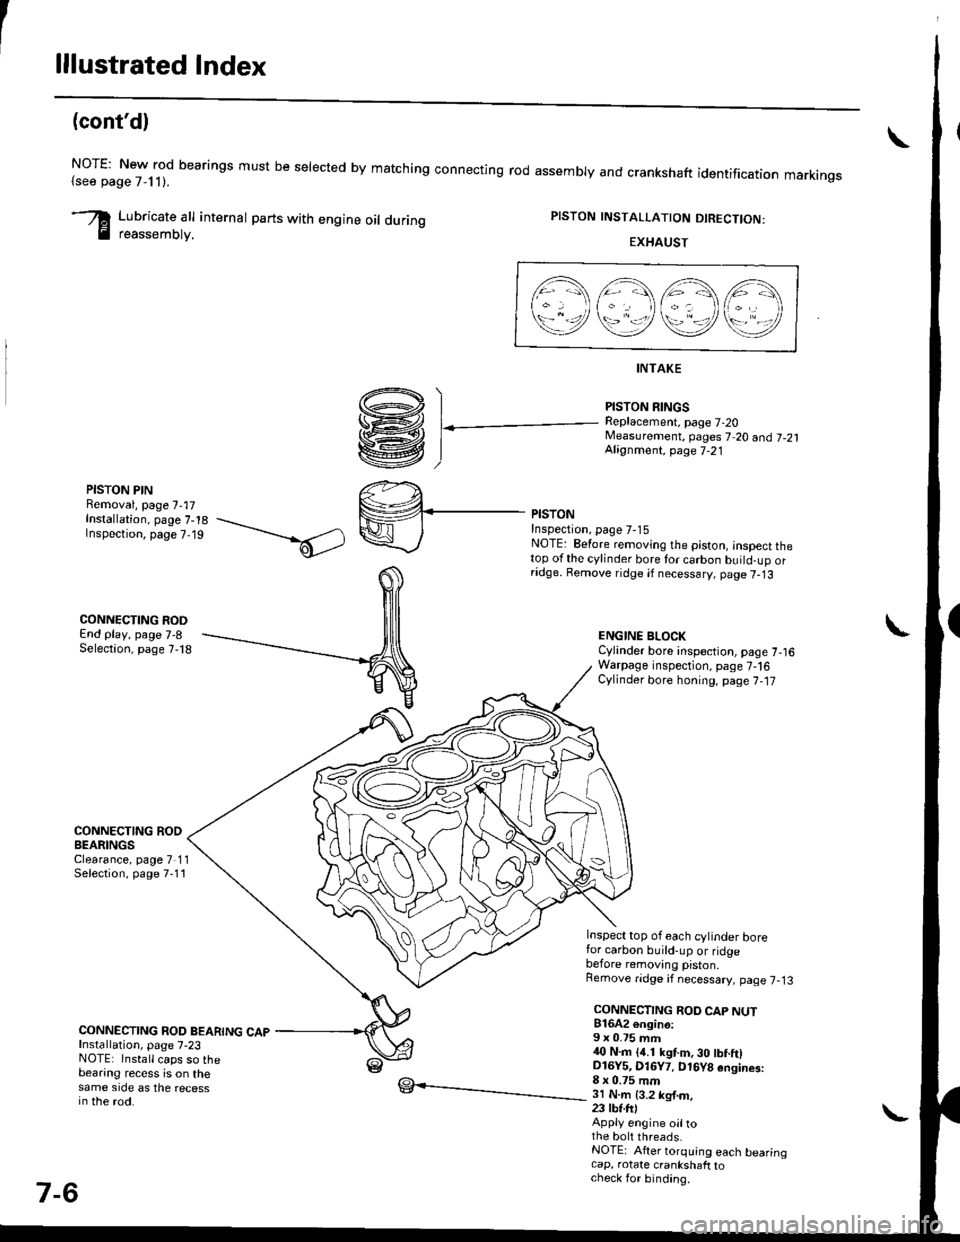 HONDA CIVIC 1998 6.G Workshop Manual lllustrated Index
(contd)
NOTE: New rod bearings must be selected by matching connecting rod assembly and crankshaft(see page 7,11).identification markings
Lubricate all internal parts with engine oi